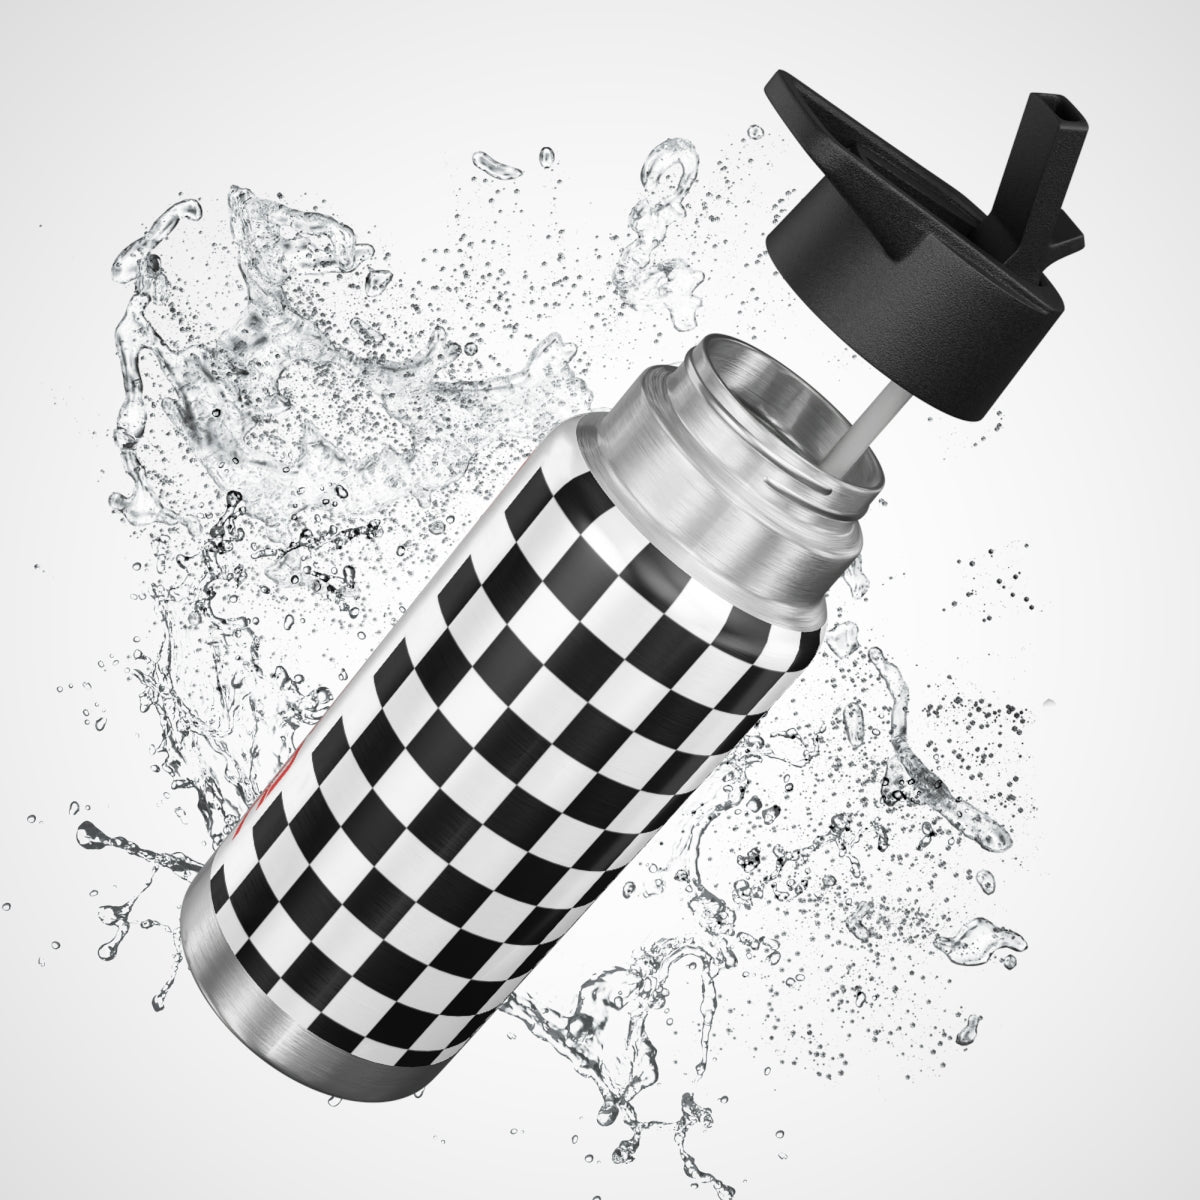 32 OZ DOUBLE-WALL STAINLESS STEEL WATER BOTTLE - BLACK CHECKER